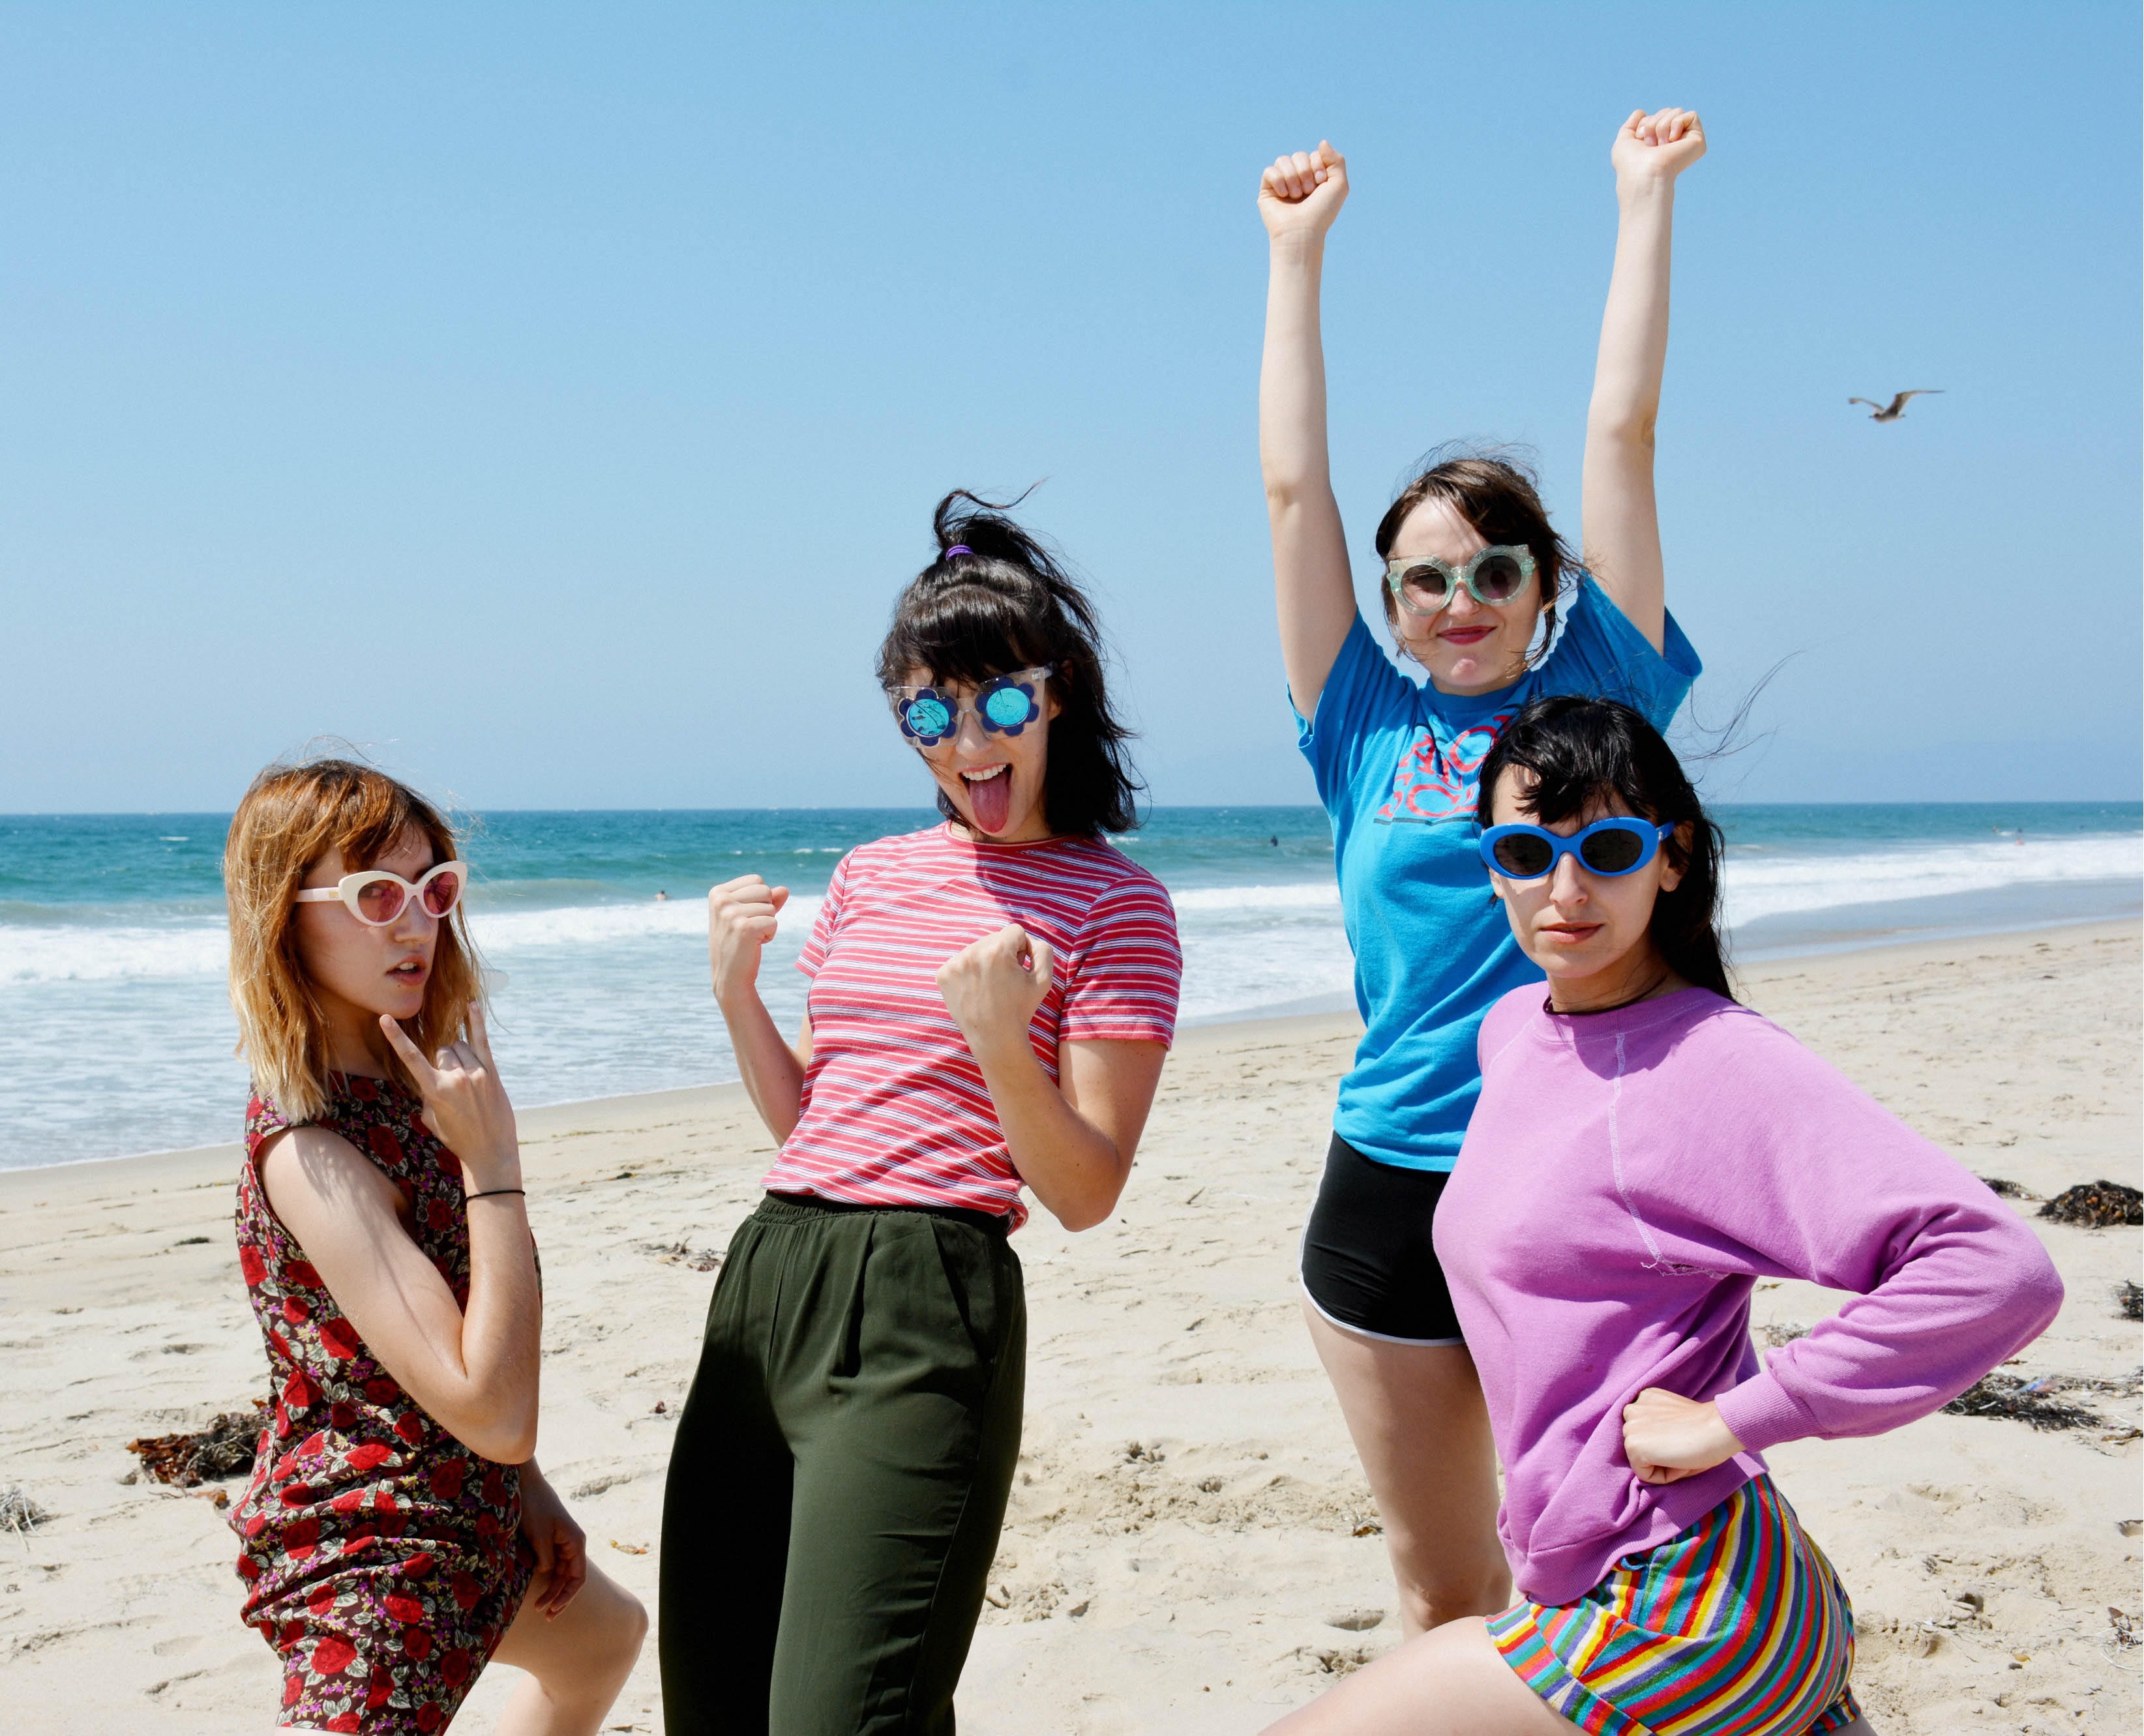 Peach Kelli Pop Interview For Northern Transmissions